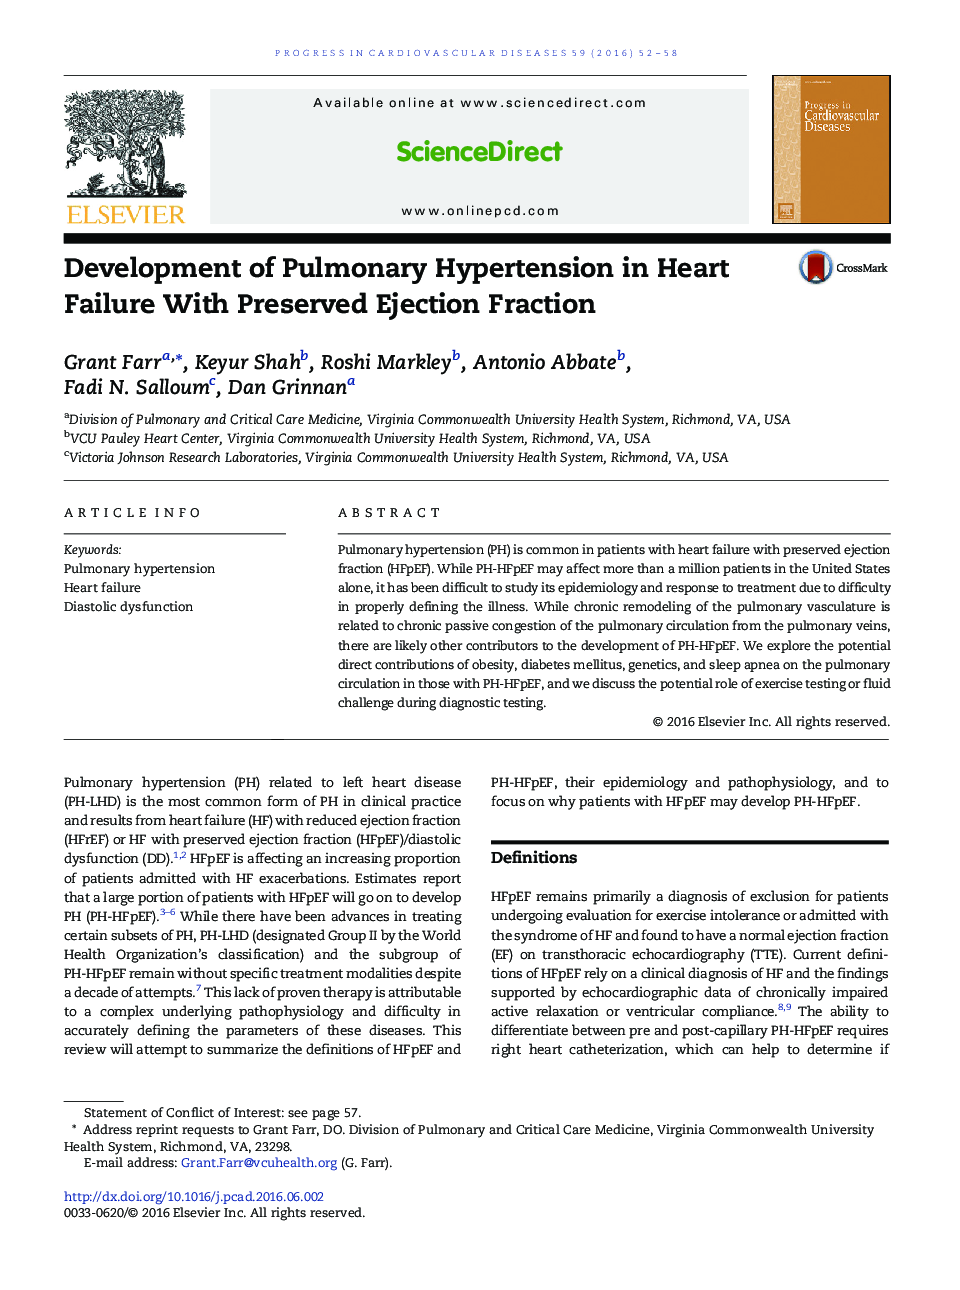 Development of Pulmonary Hypertension in Heart Failure With Preserved Ejection Fraction